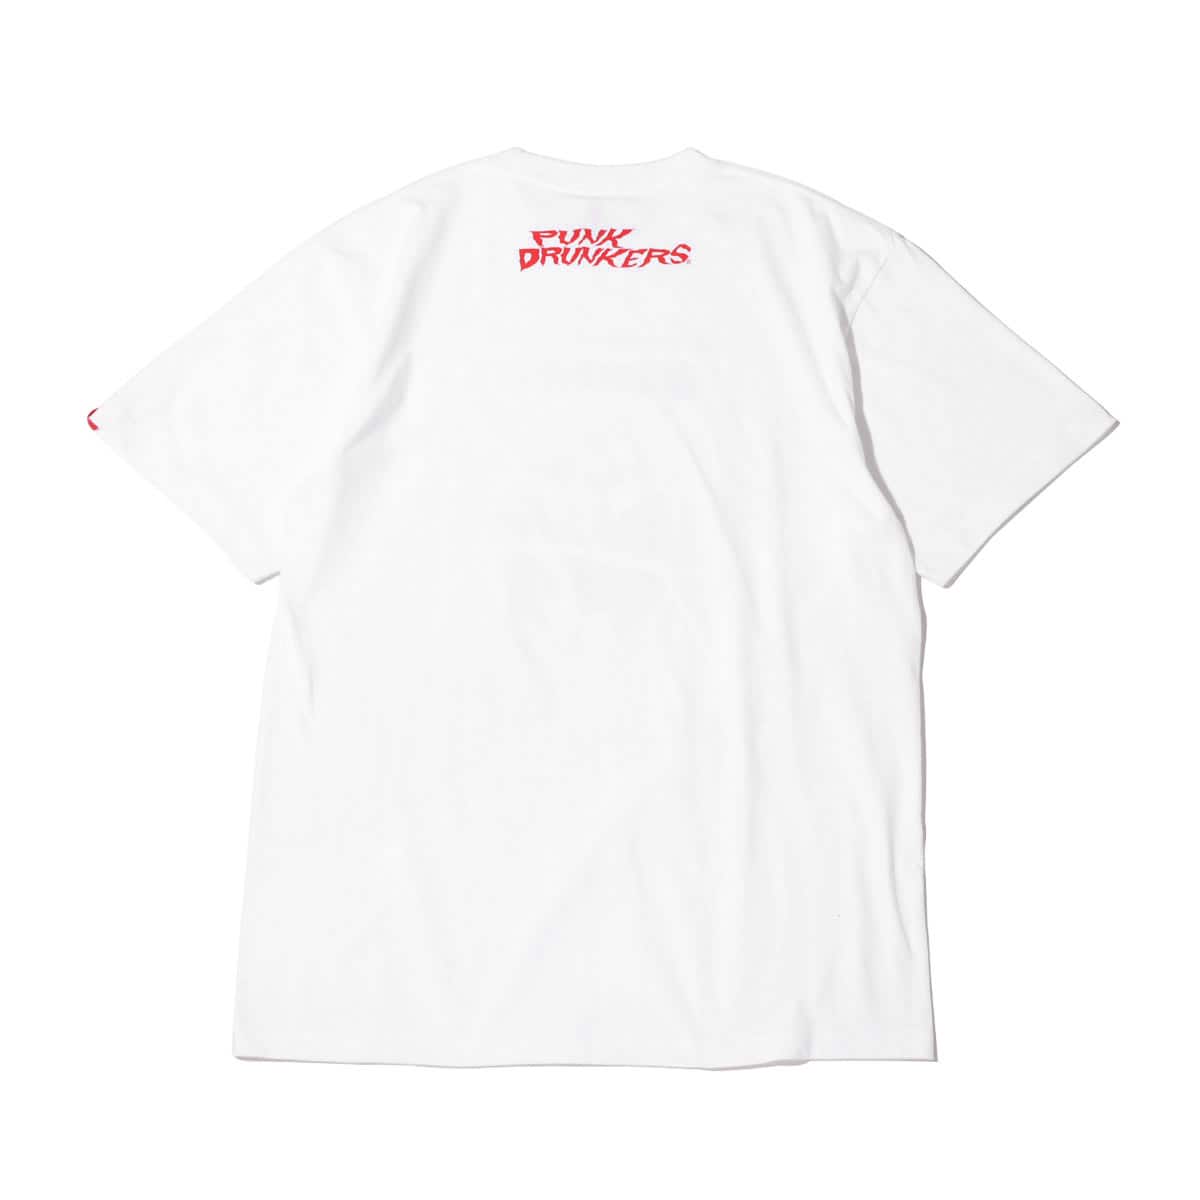 PUNK DRUNKERS × atmos 1等賞TEE WHITE